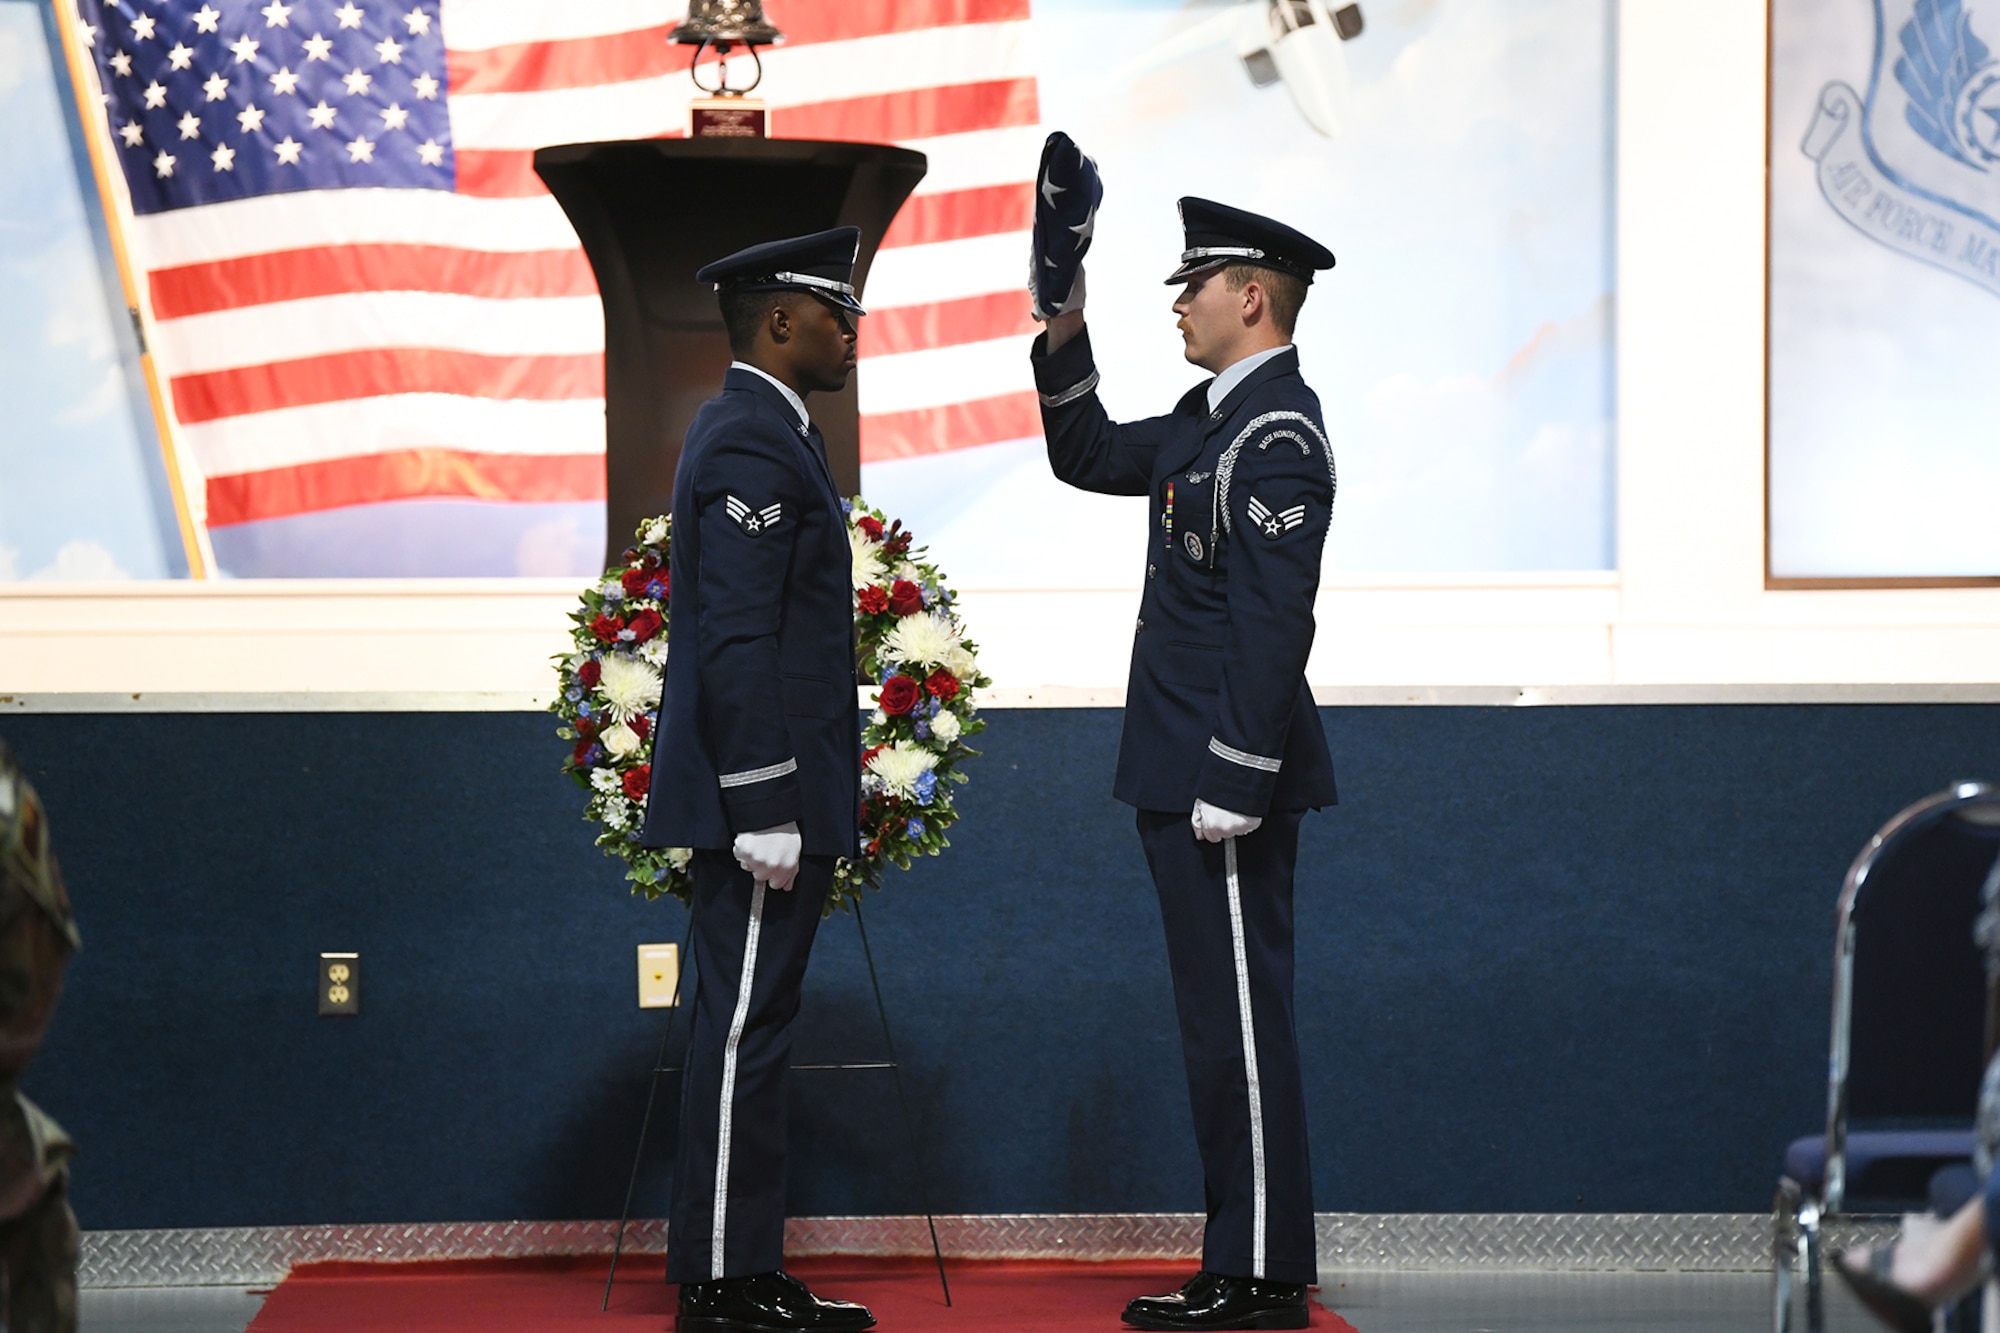 Two men in military uniform stand facing each other while man on the right lowers a U.S. flag folded into a triangle shape